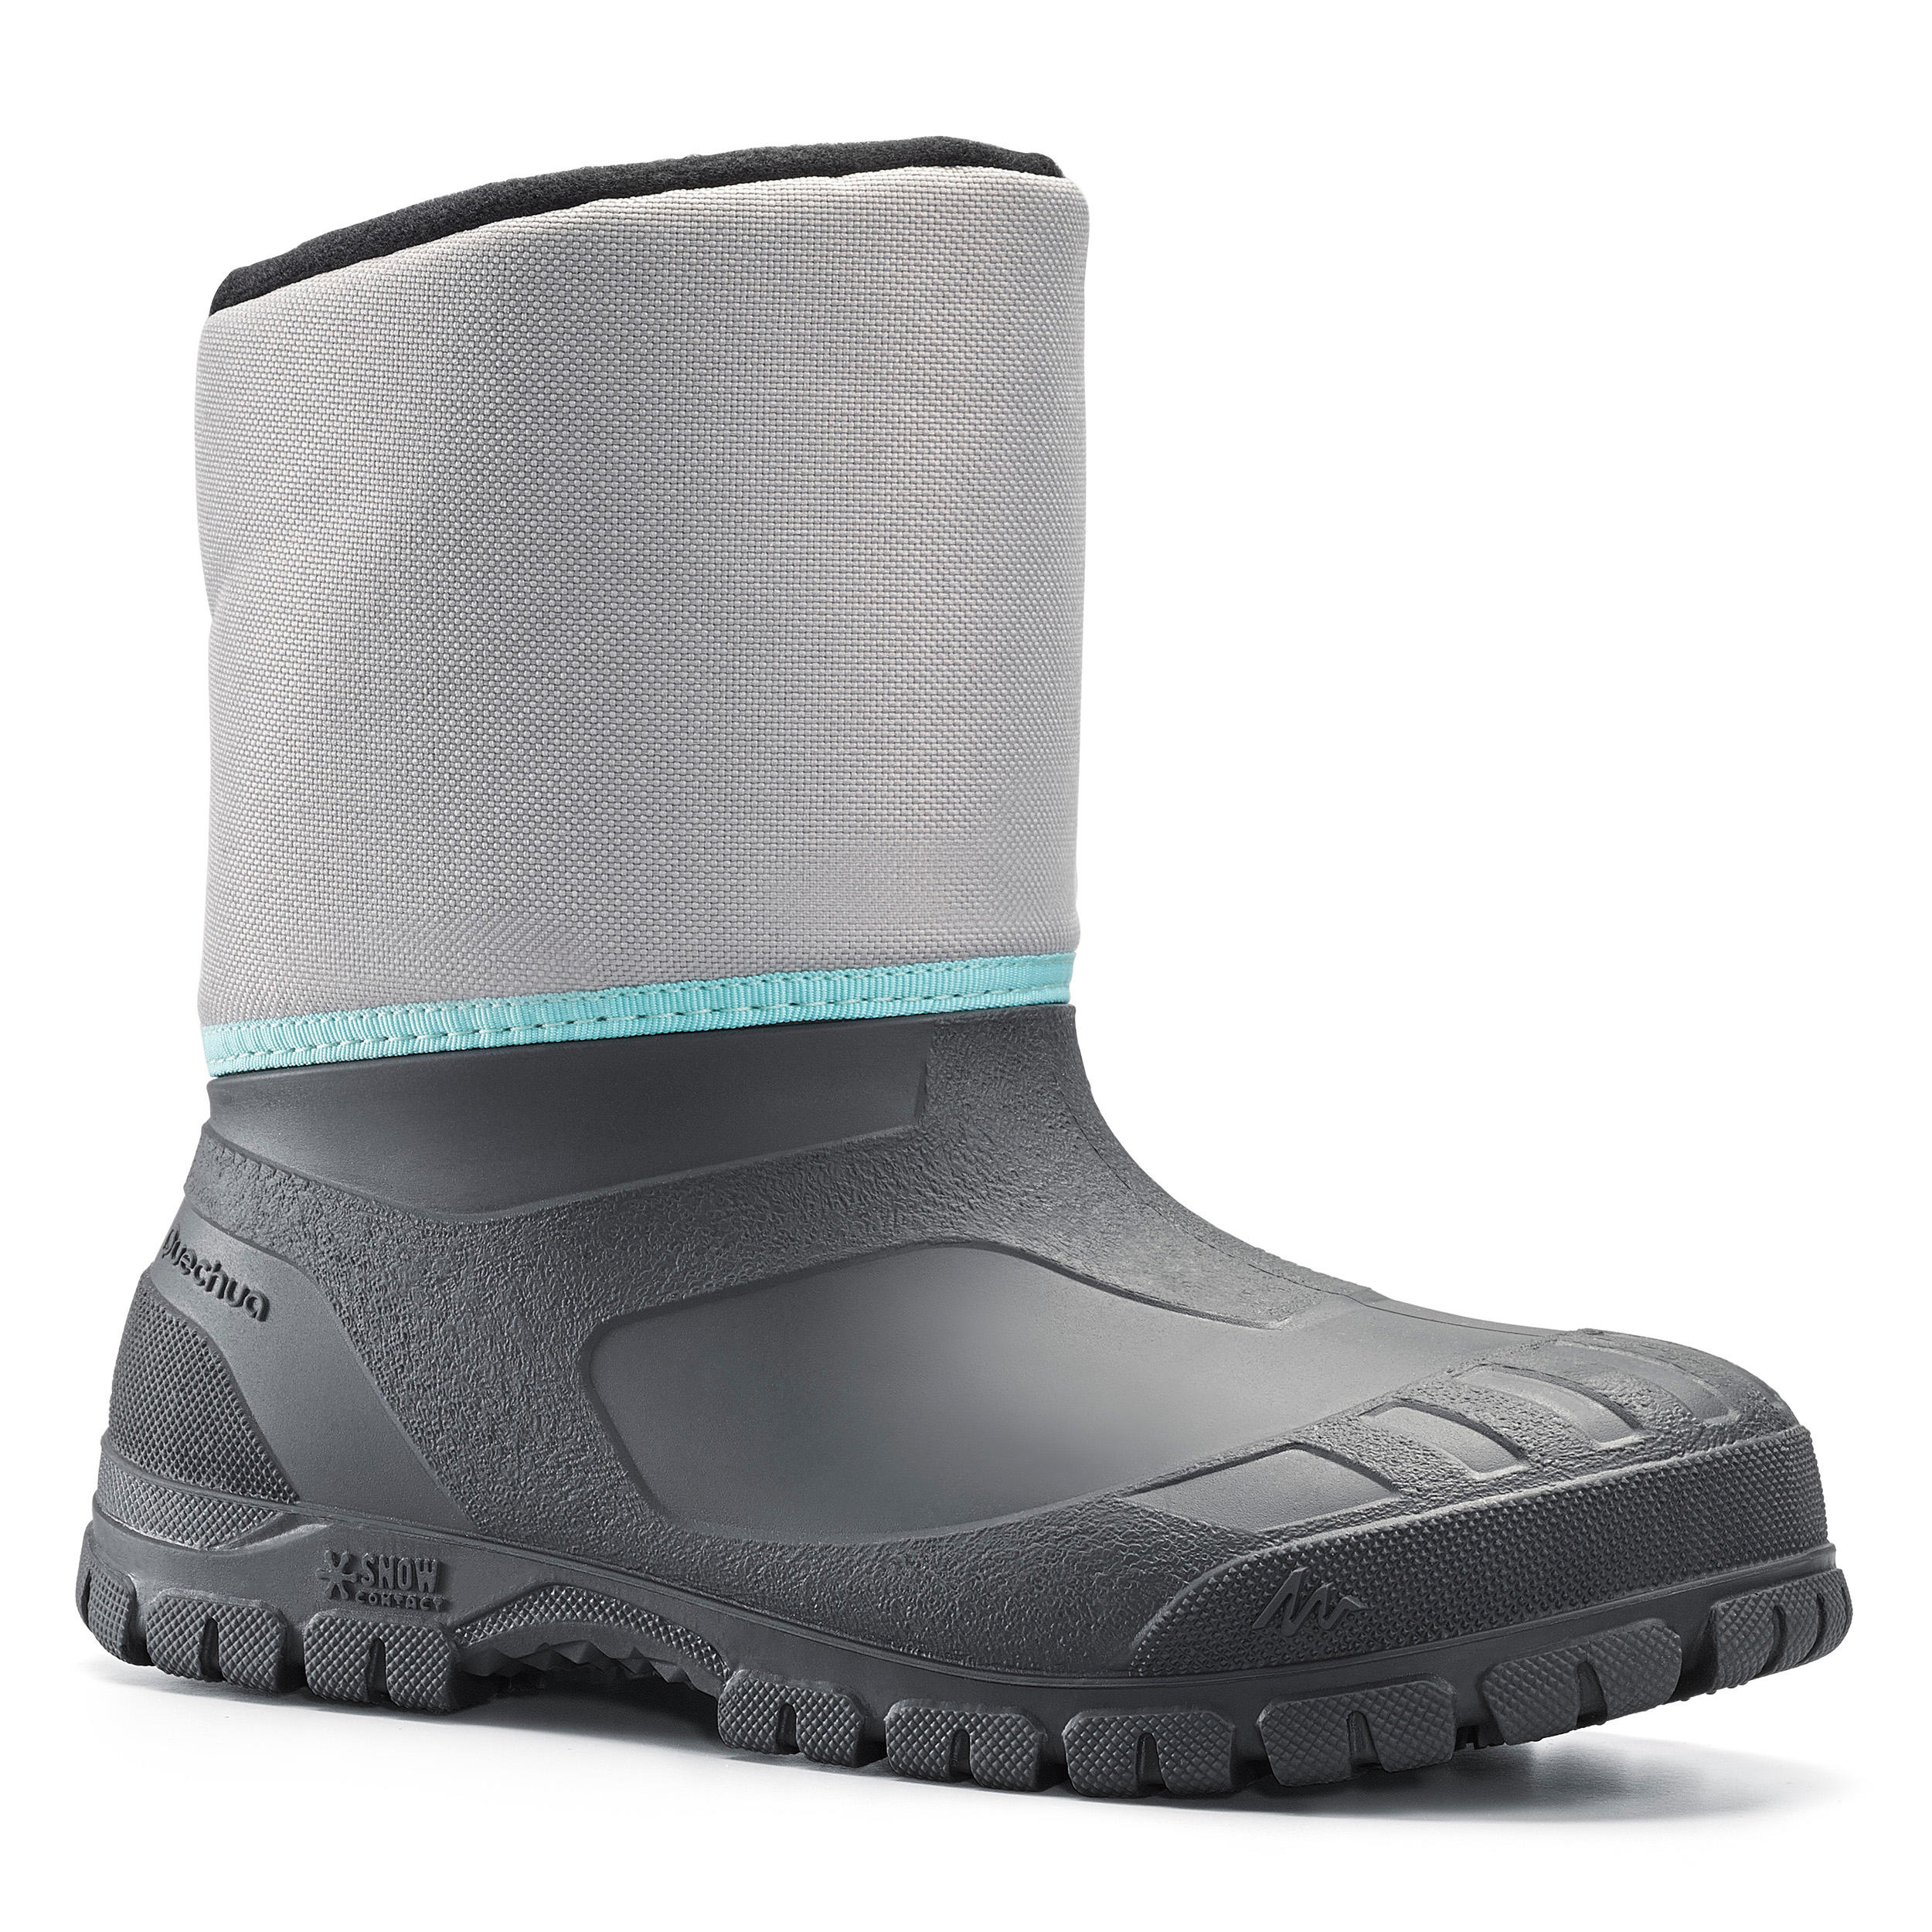 KIDS' WARM AND WATERPROOF SNOW BOOTS 